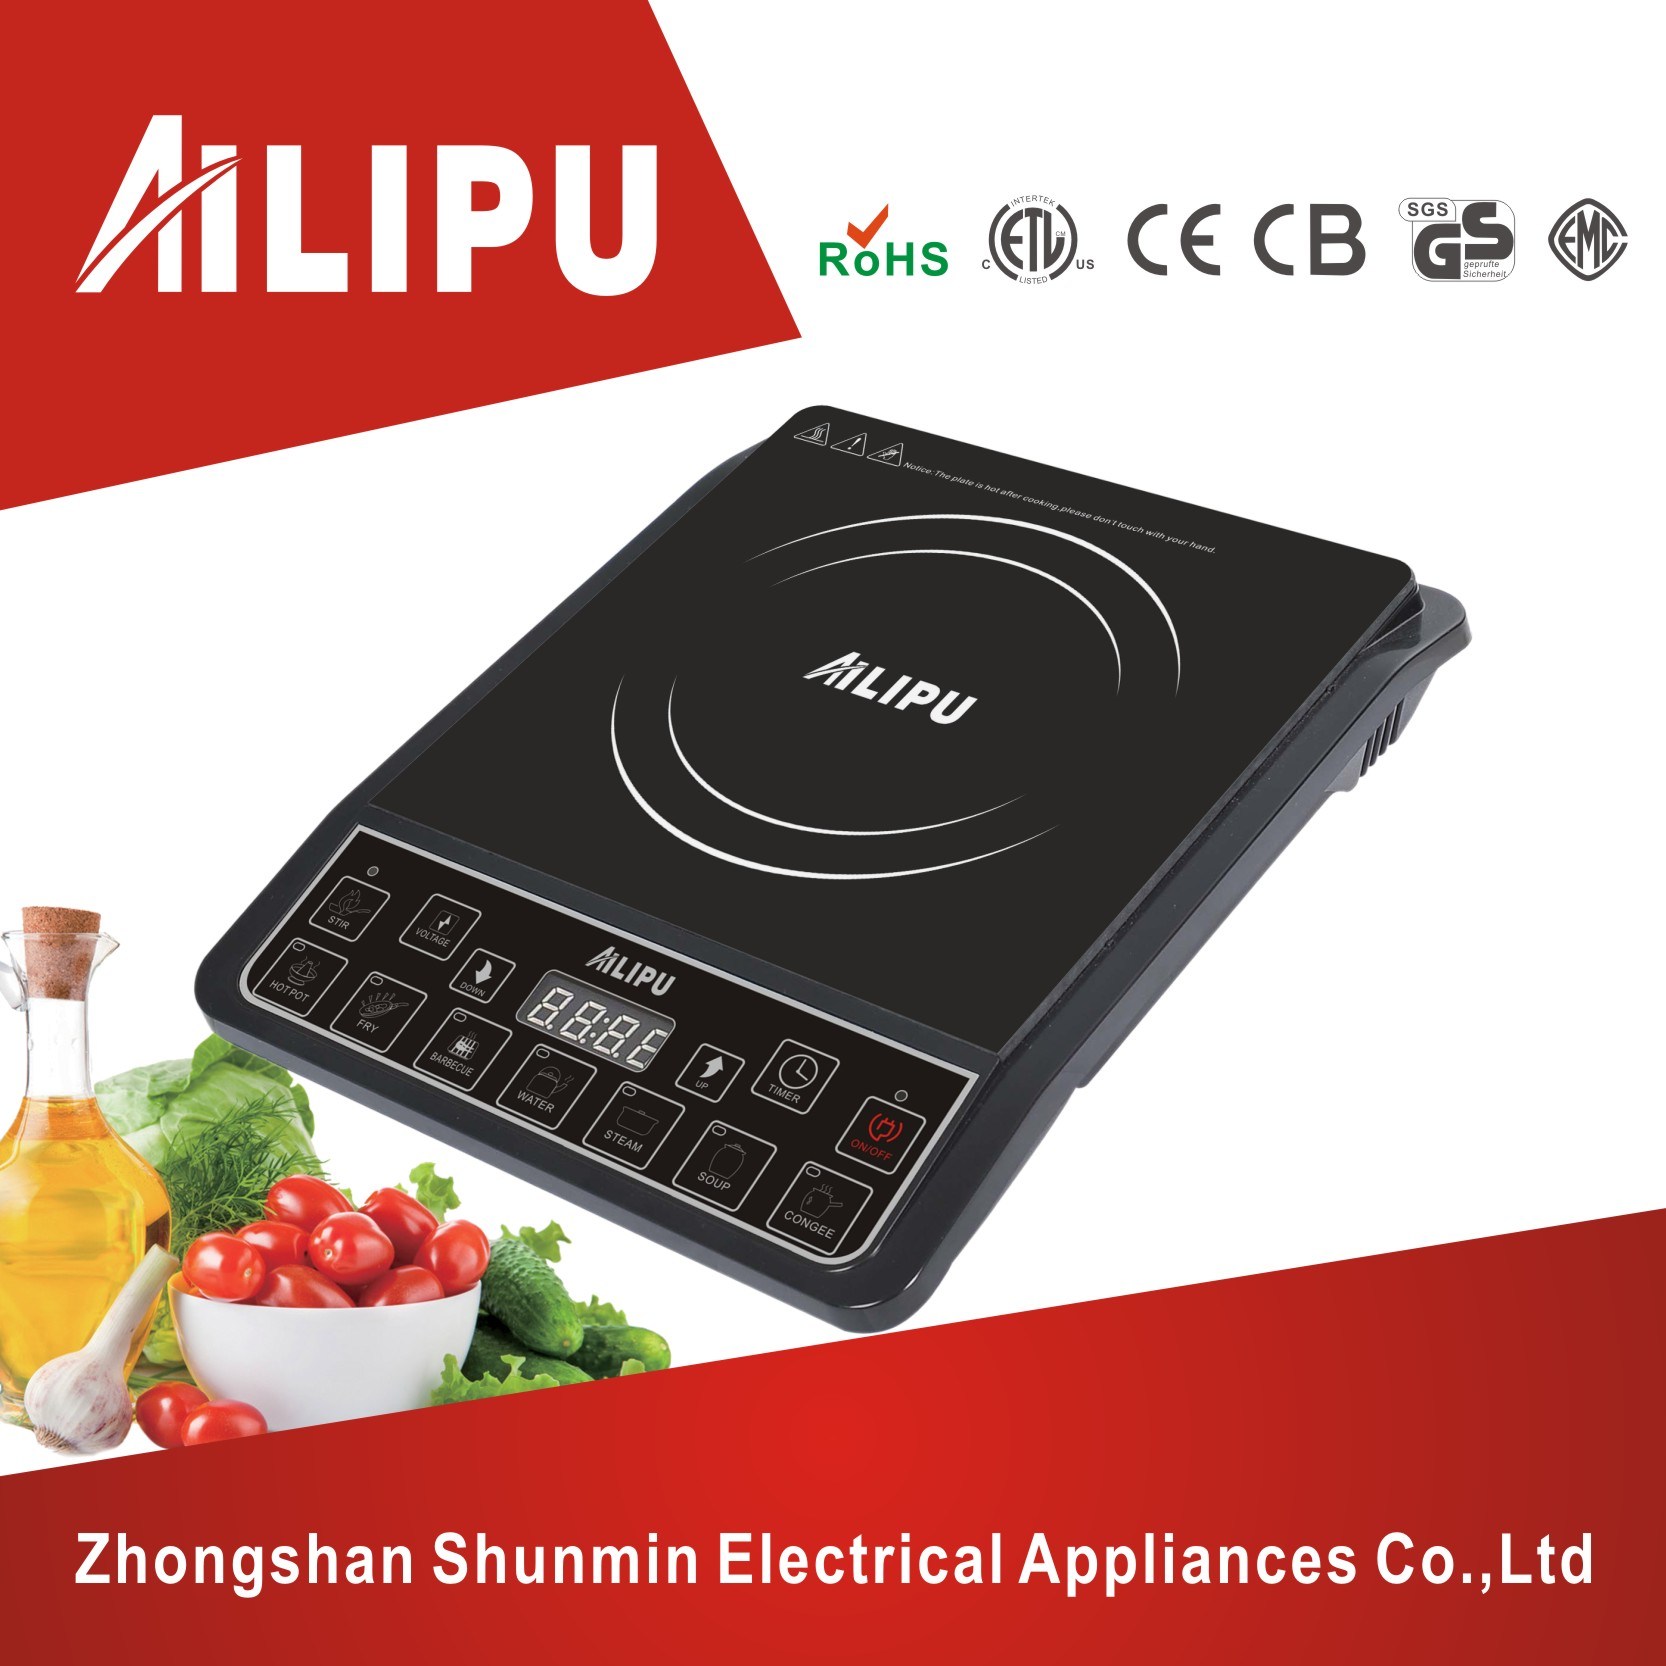 4 Digital Display Button Push Induction Cooker